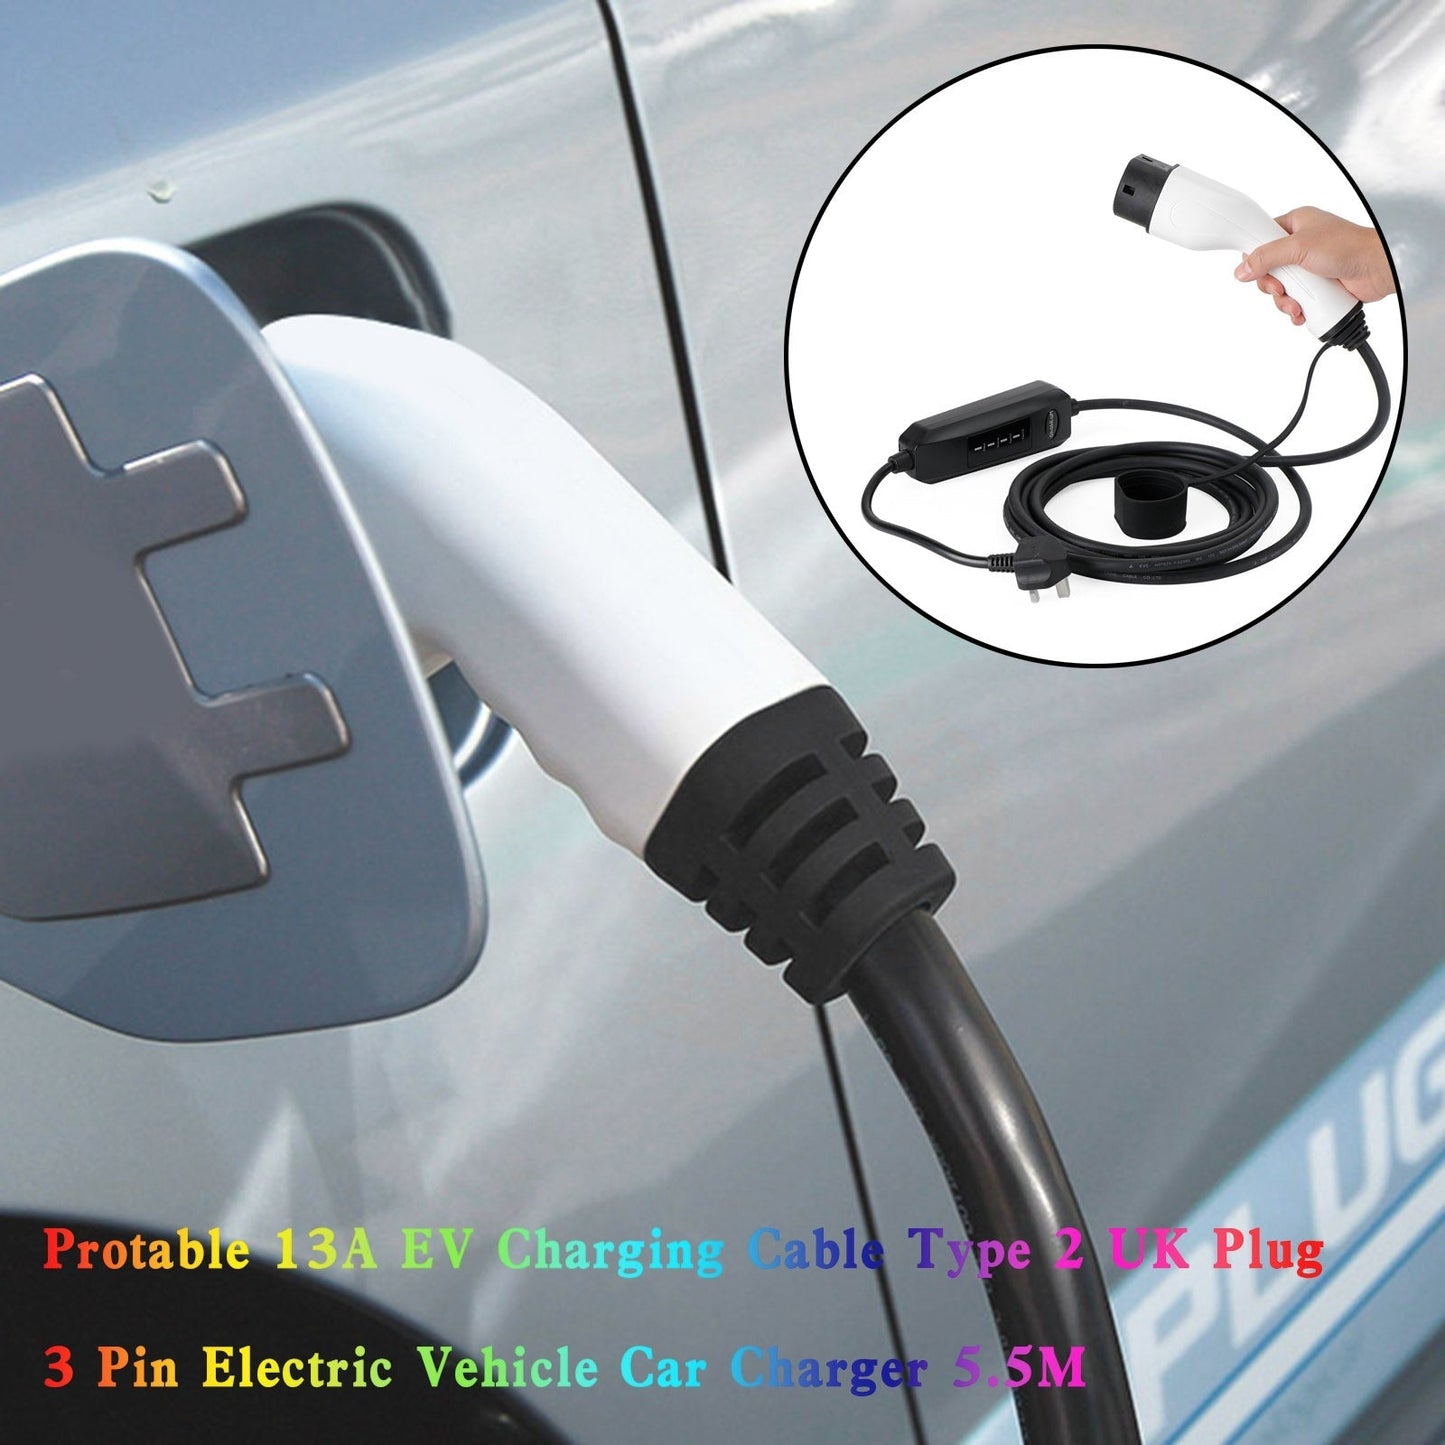 5.5M Protable 13A EV Charging Cable 3 Pin Type 2 UK Plug Electric Vehicle Car Charger